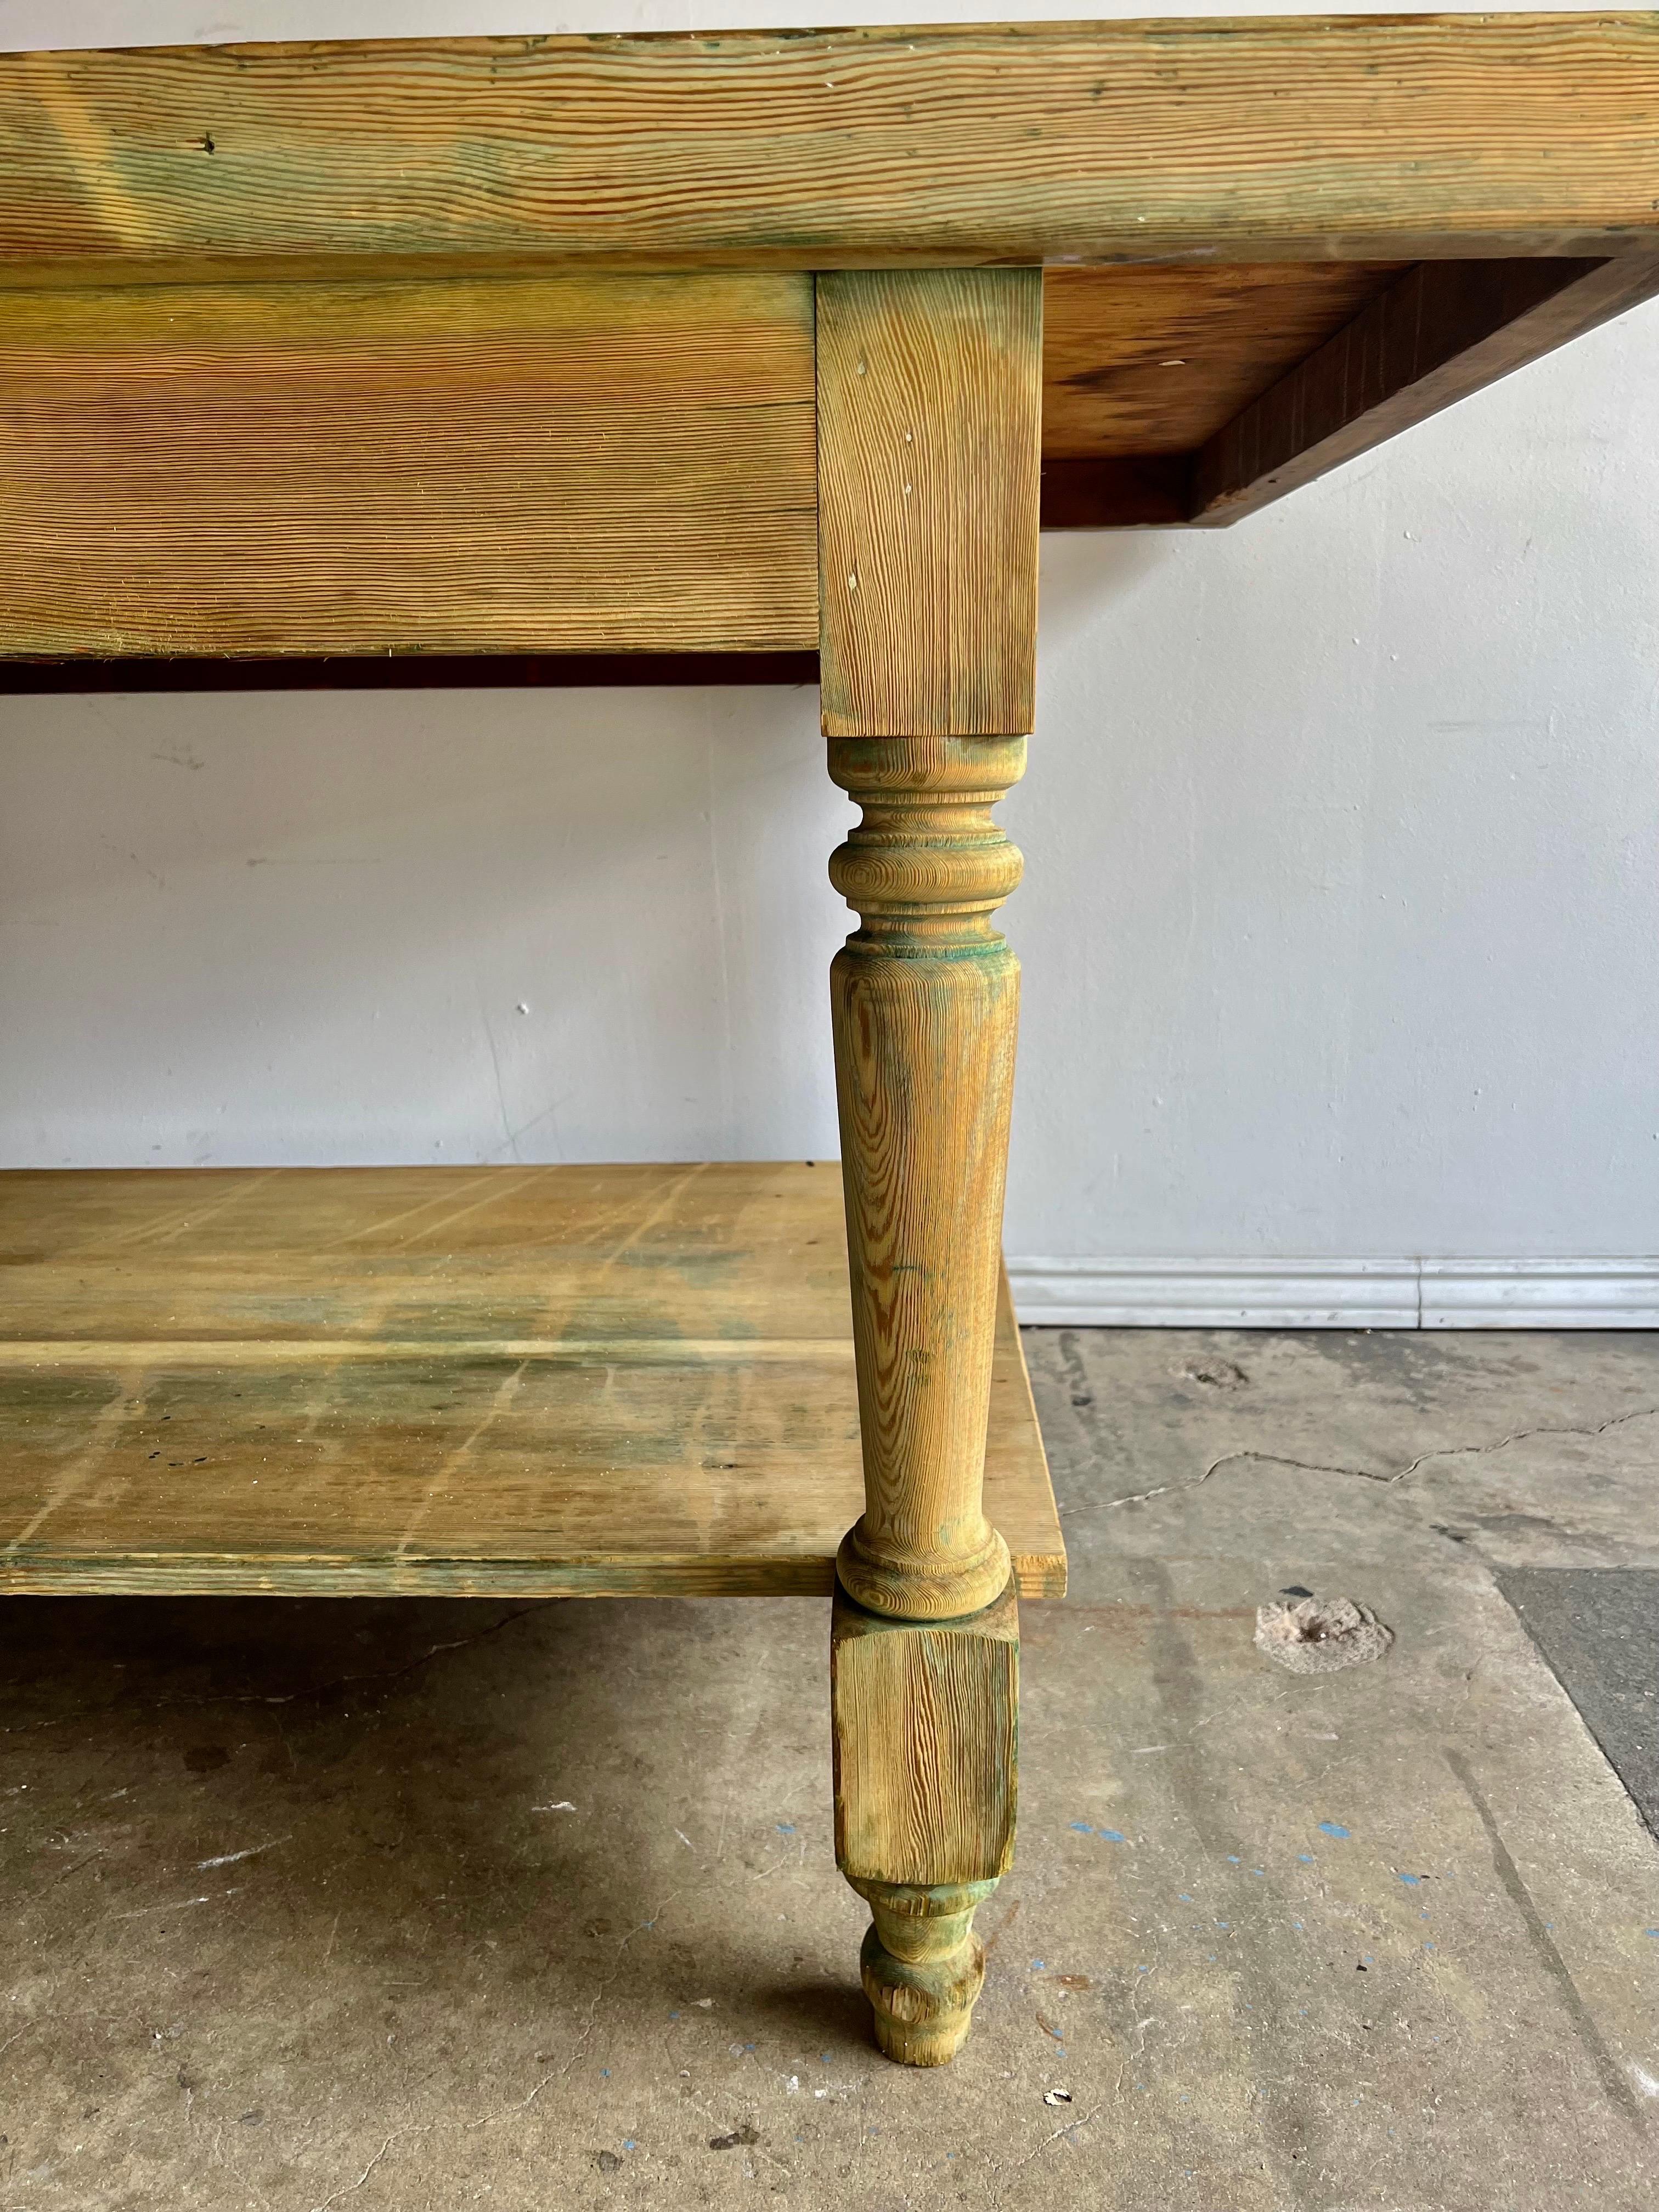 19th Century bleached wood Swedish rustic farm table. The table stands on four straight turned legs that connect the bottom shelf. Remnants of the original paint can be seen when observed closely.